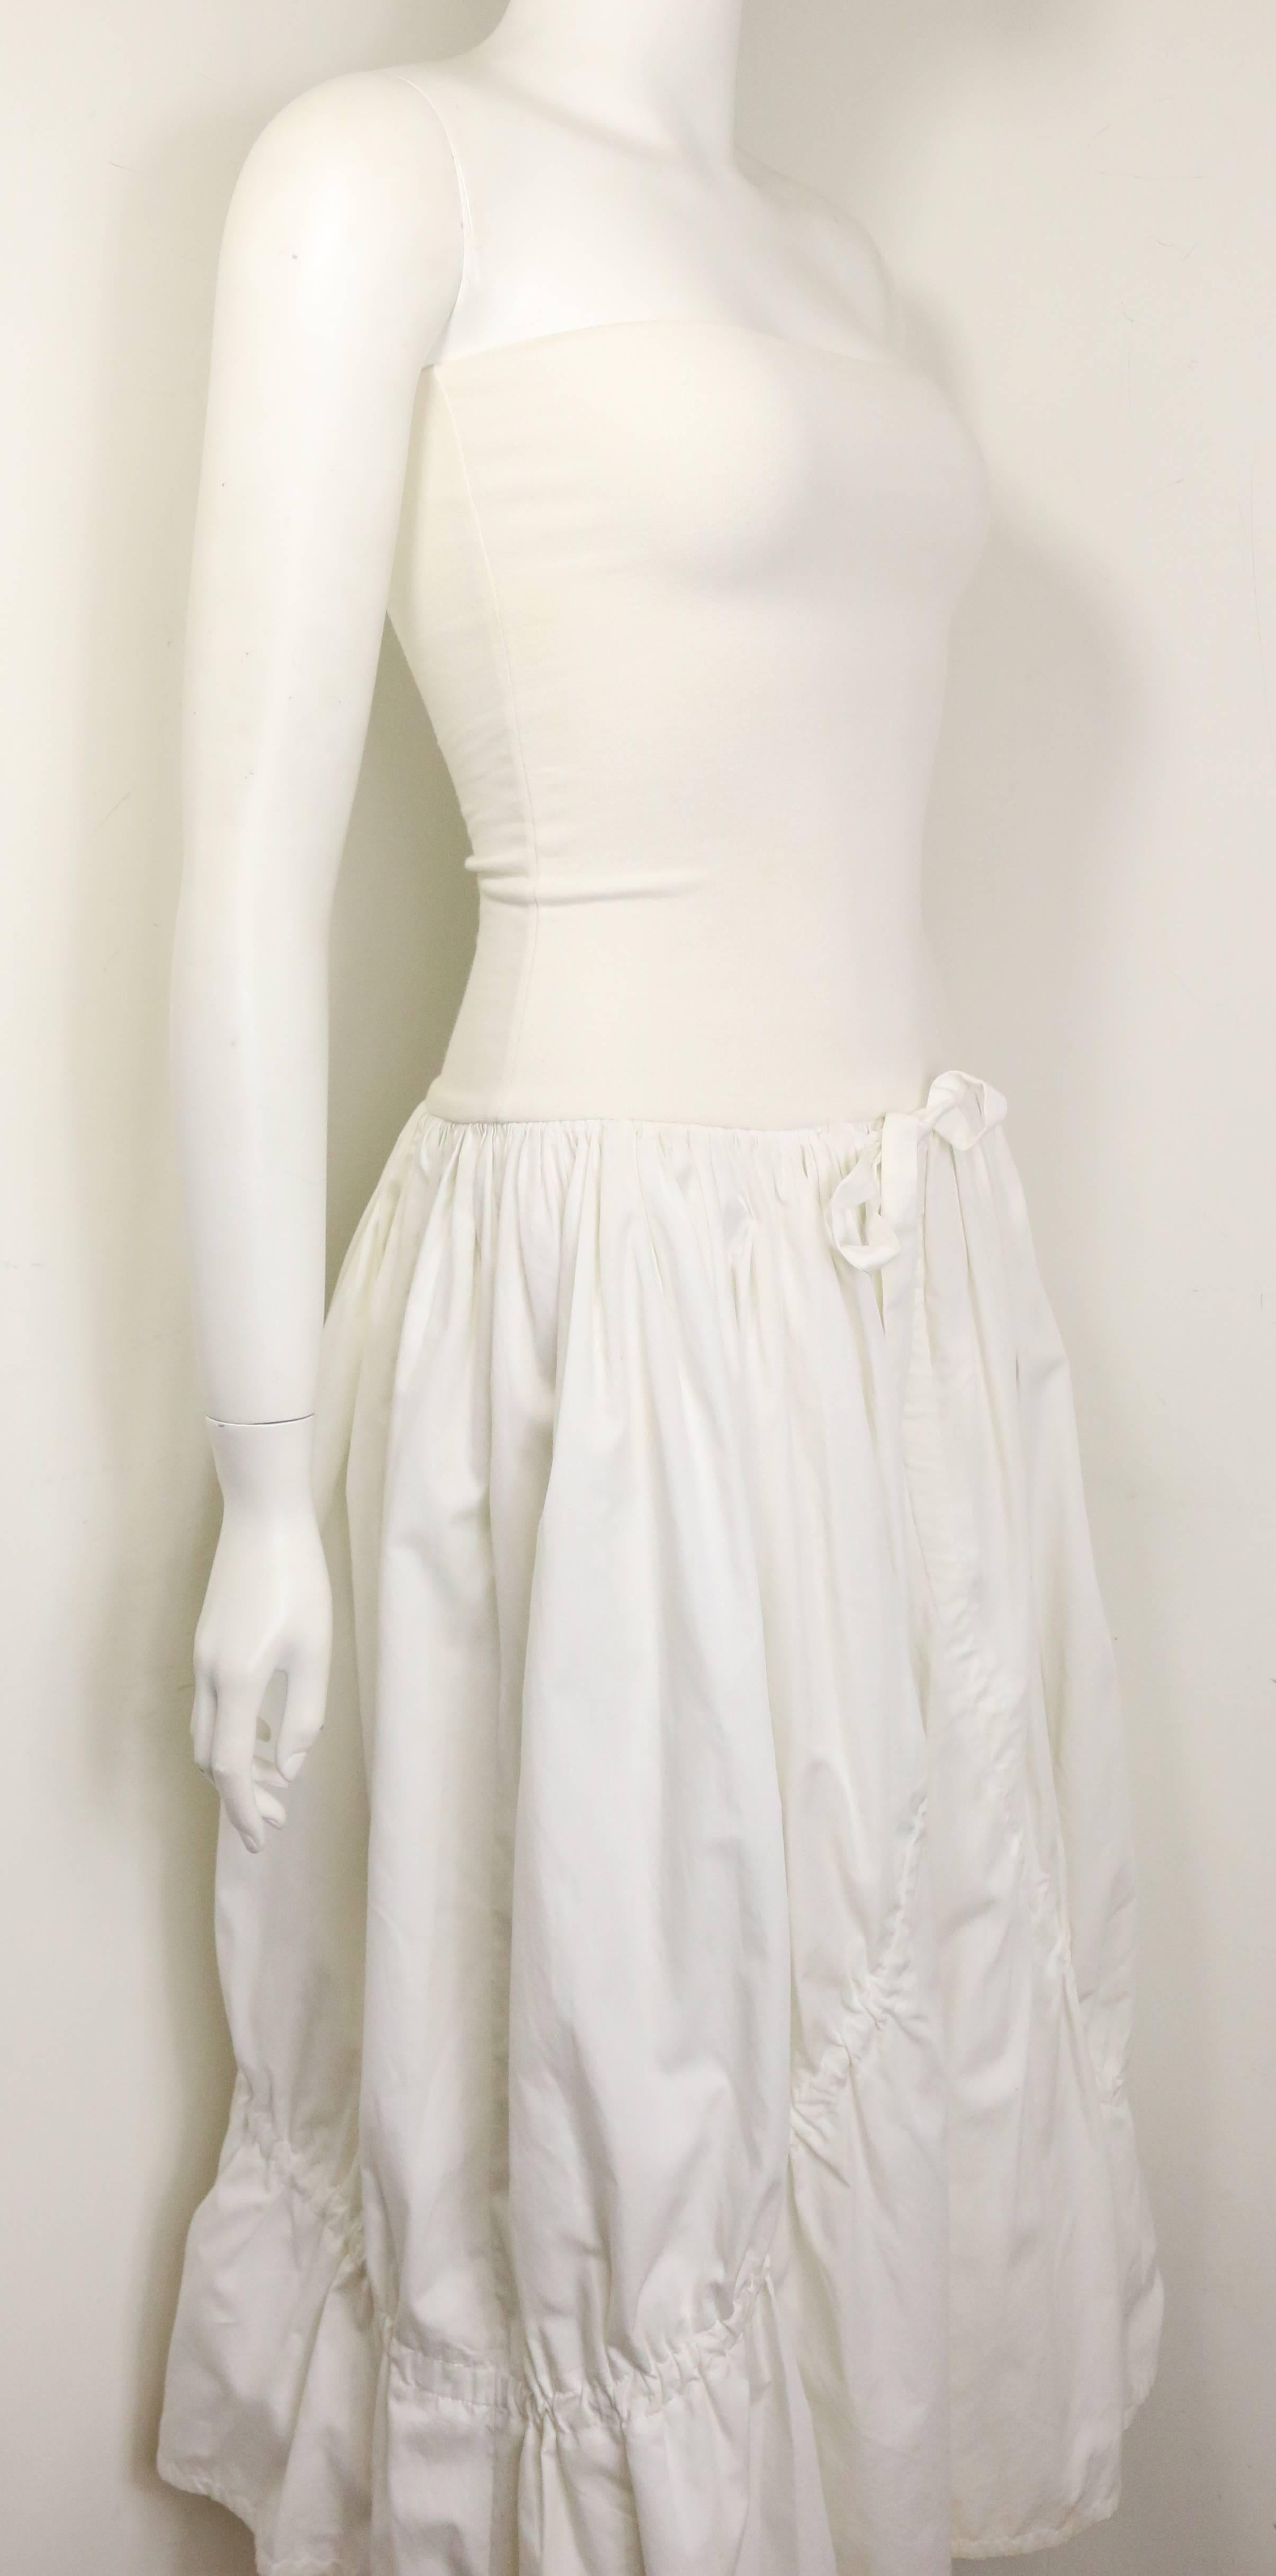 - Vintage 90s Dolce and Gabbana white cotton strapless dress. Featuring two layers seaming with drawstrings. There are two drawstrings fastening on the outside layer and two drawstrings fastening on the inside. Its a very interesting dress with